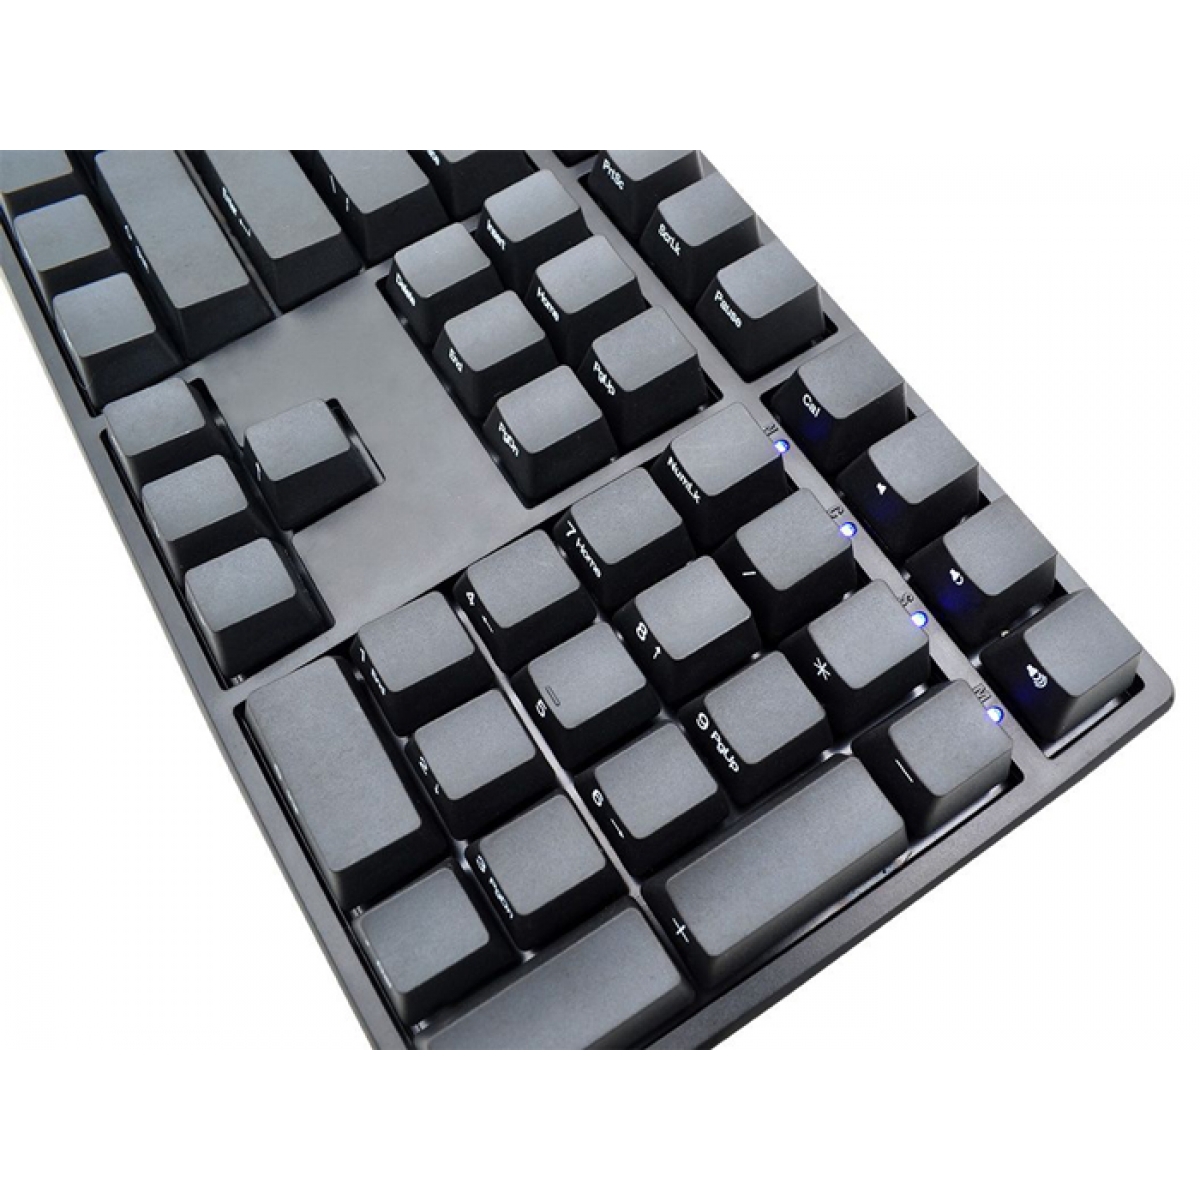 Teclado Gamer Mecanico Ducky Channel One Sideprint, Switch Red